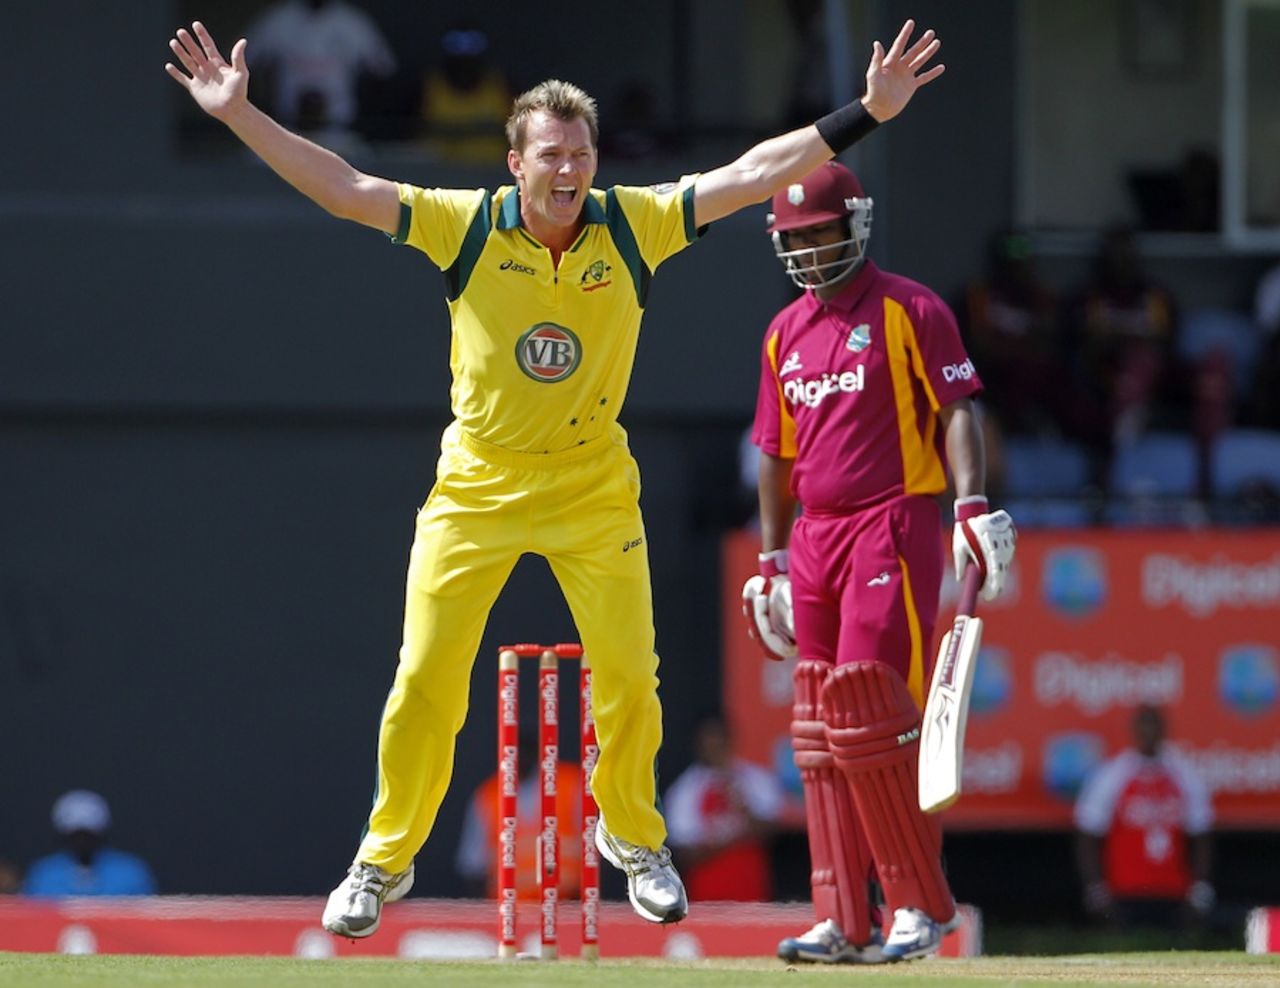 Brett Lee appeals unsuccessfully for lbw against Johnson Charles, West Indies v Australia, 4th ODI, Gros Islet, March 23, 2012